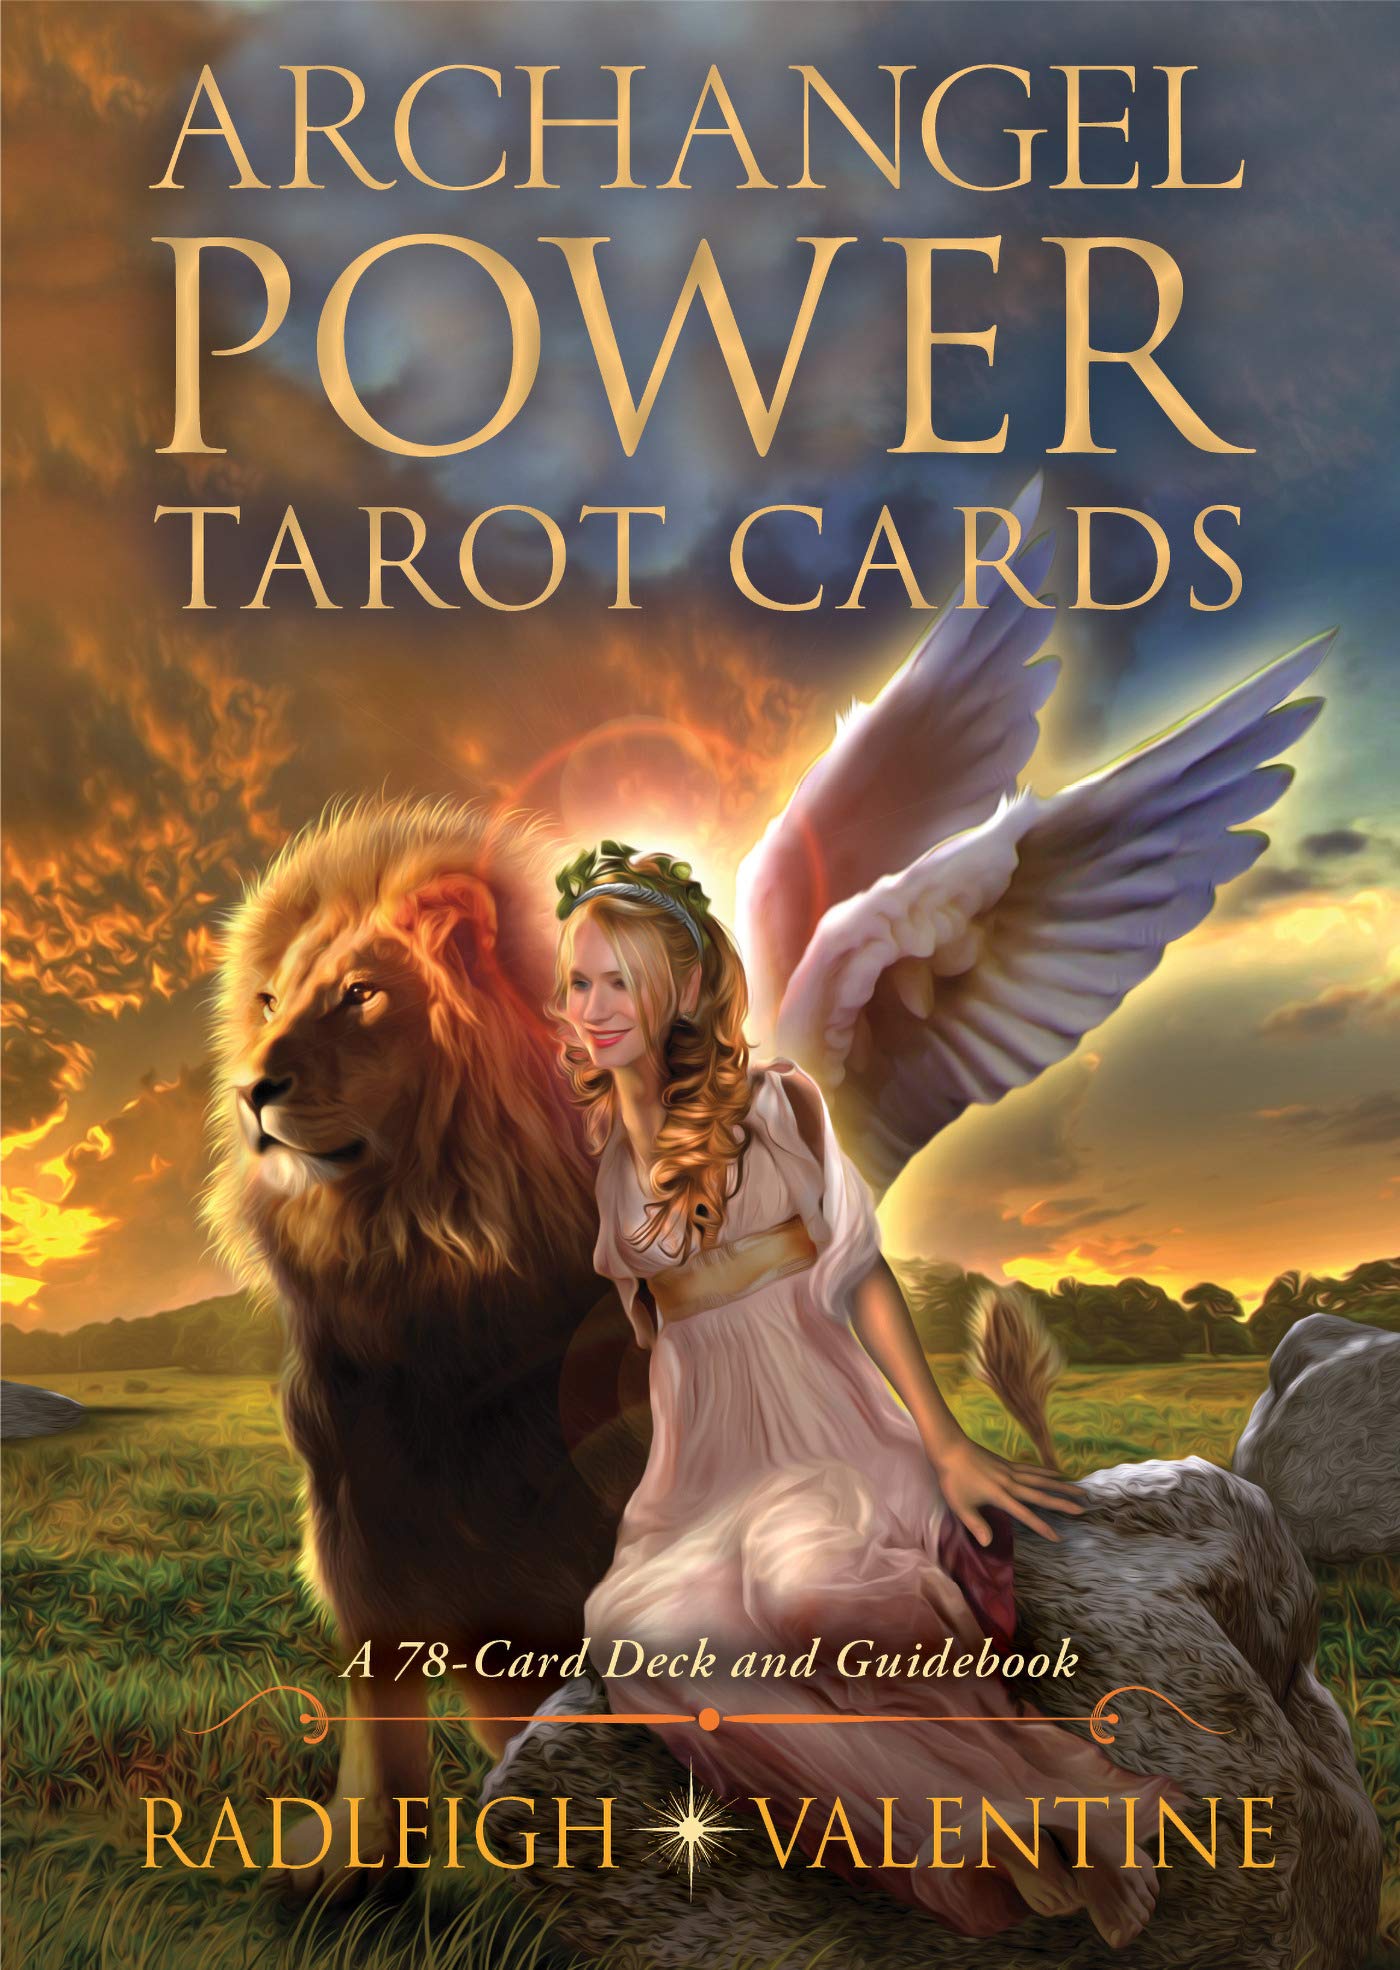 Archangel Power Tarot Cards Now Available!